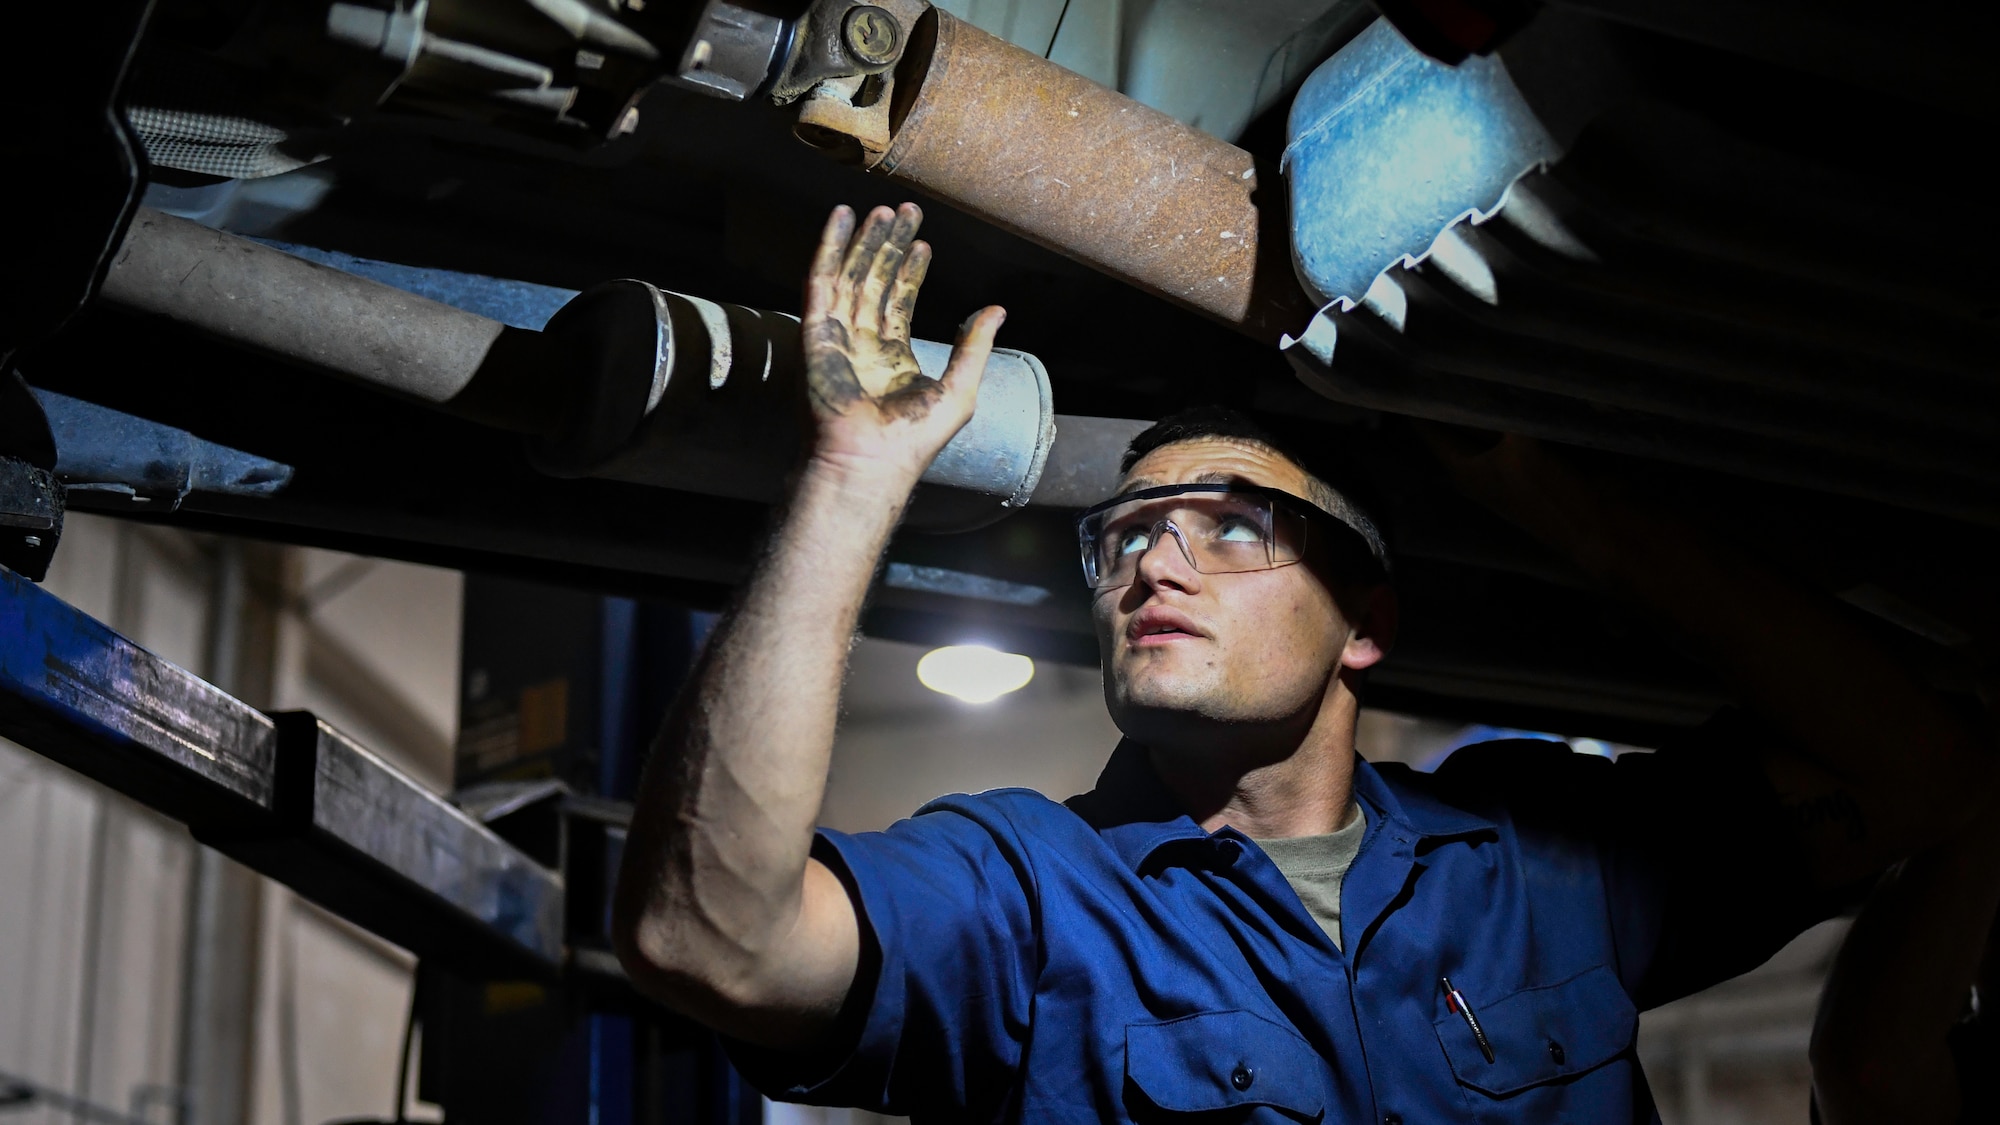 U.S. Air Force Senior Airman Darian O’Banion, 386th Expeditionary Logistics Readiness Squadron vehicle and equipment maintenance journeyman, lines up a driveshaft for installation on a vehicle at Ali Al Salem Air Base, Kuwait, July 29, 2019. The driveshaft is a mechanical component for transmitting torque and rotation, usually used to connect other components of a drive train that cannot be connected directly because of distance or the need to allow for relative movement between them. (U.S. Air Force photo by Staff Sgt. Mozer O. Da Cunha)